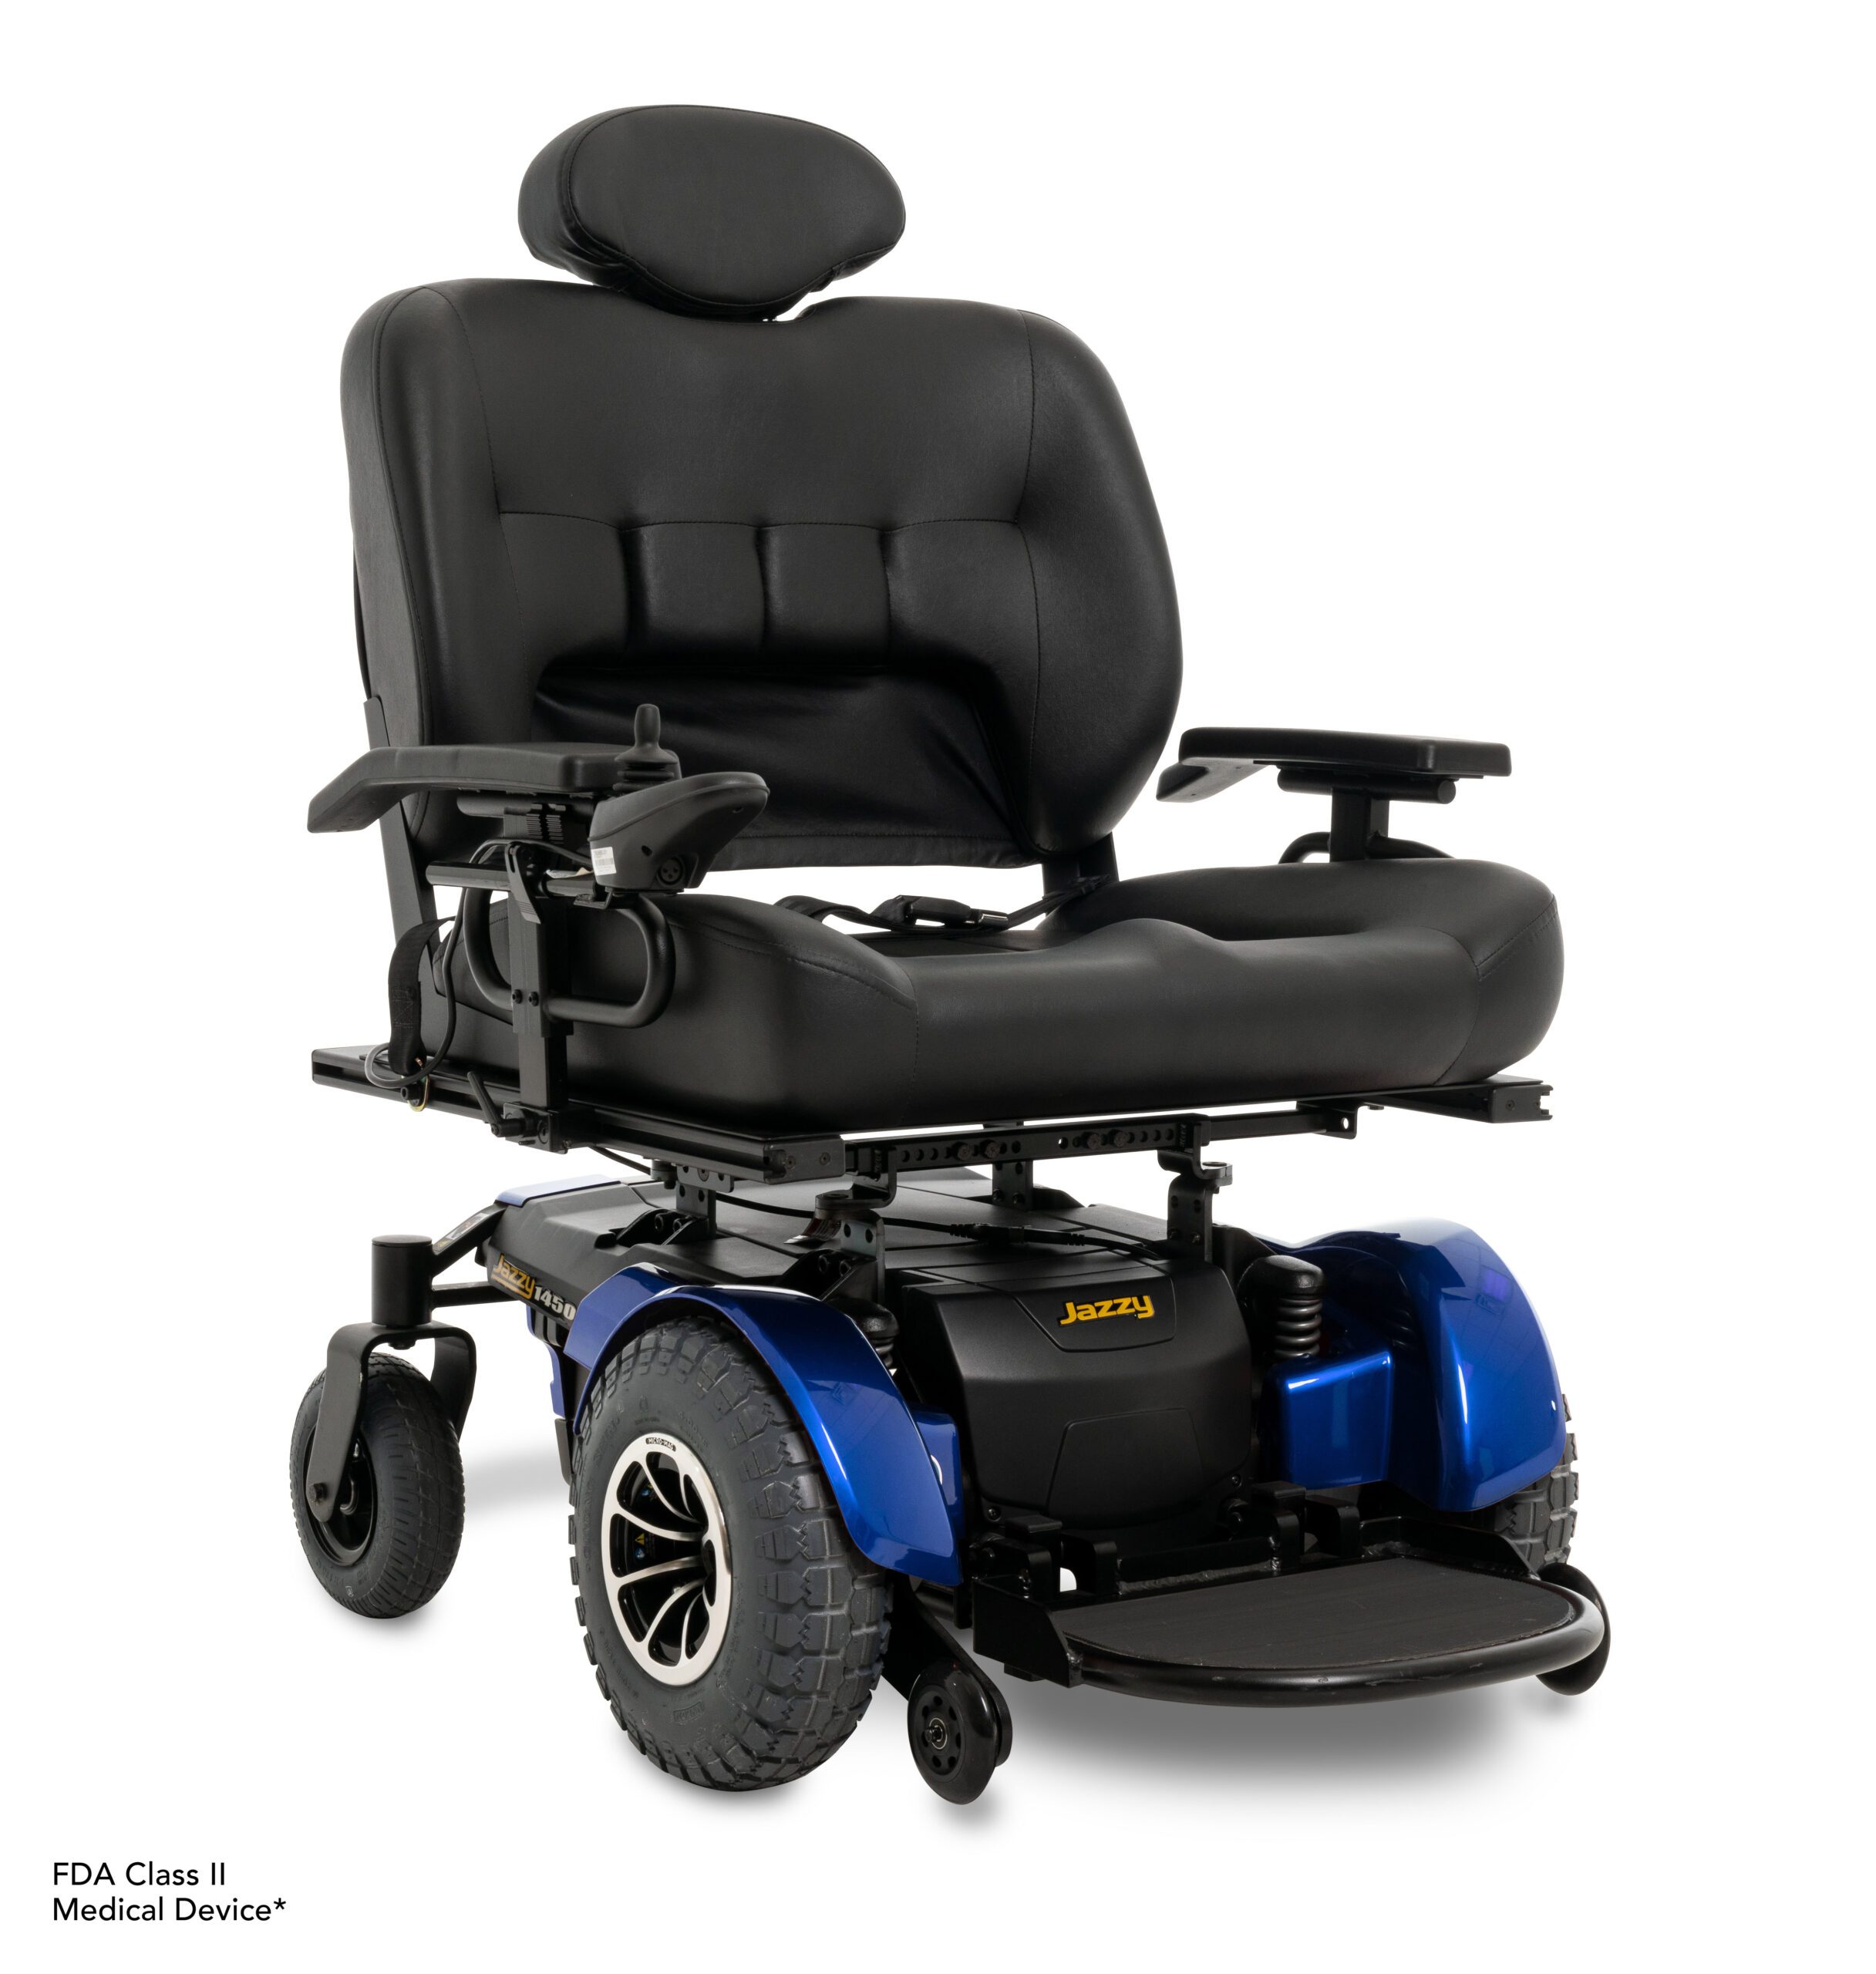 Jazzy1450_Right_Blue, HD Seat